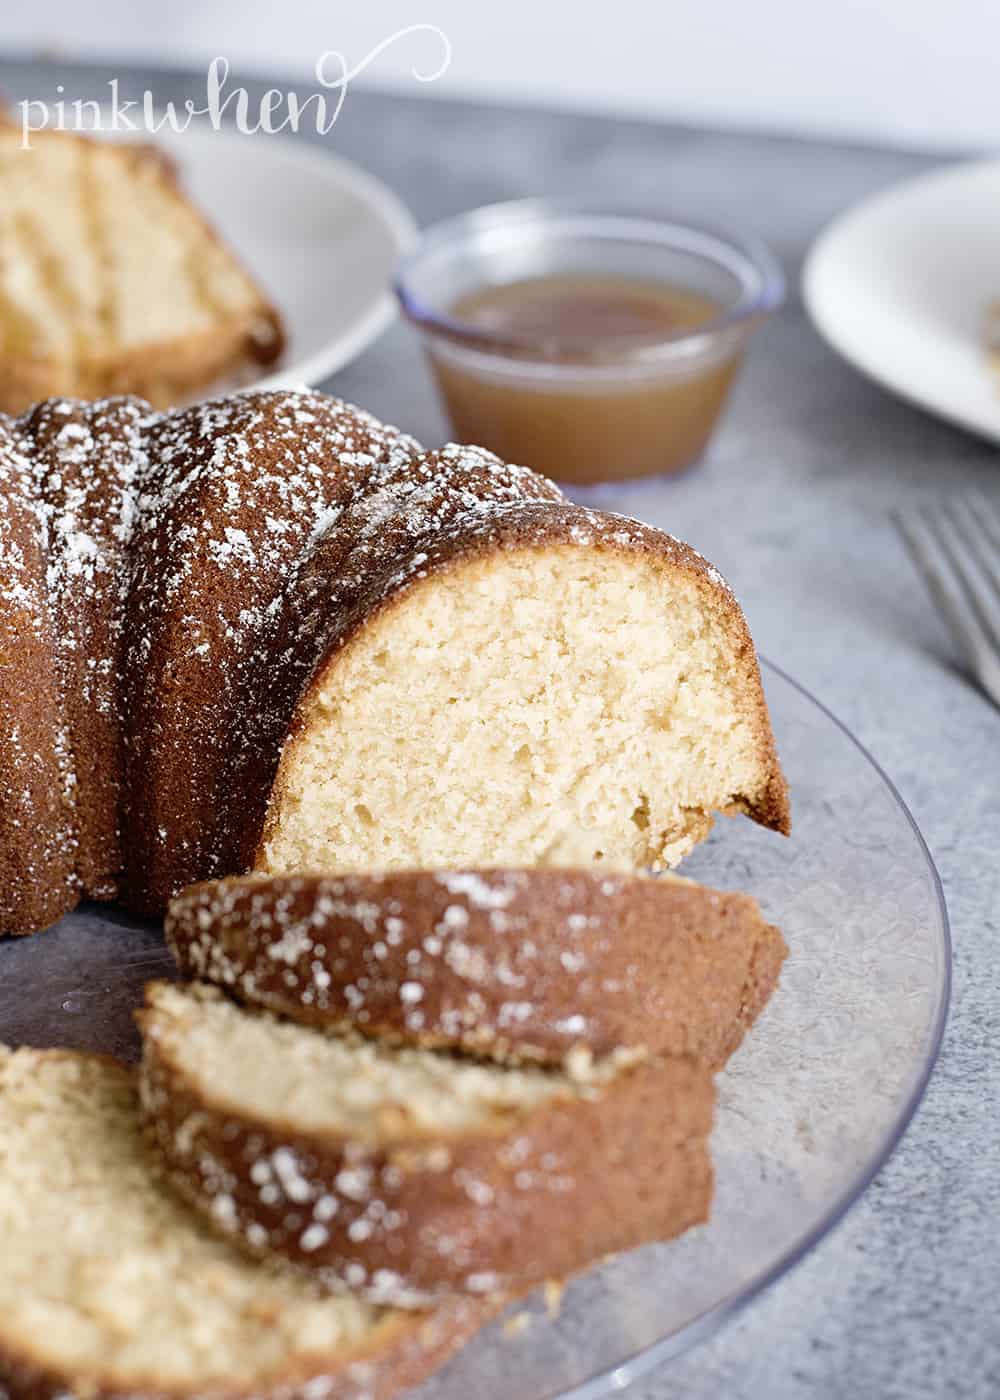 This BROWN SUGAR BUNDT CAKE is a must do recipe. It's one of the best, moist cake recipes I have had in a LONG time. Check it out! #bundtcake #cakerecipe #dessert